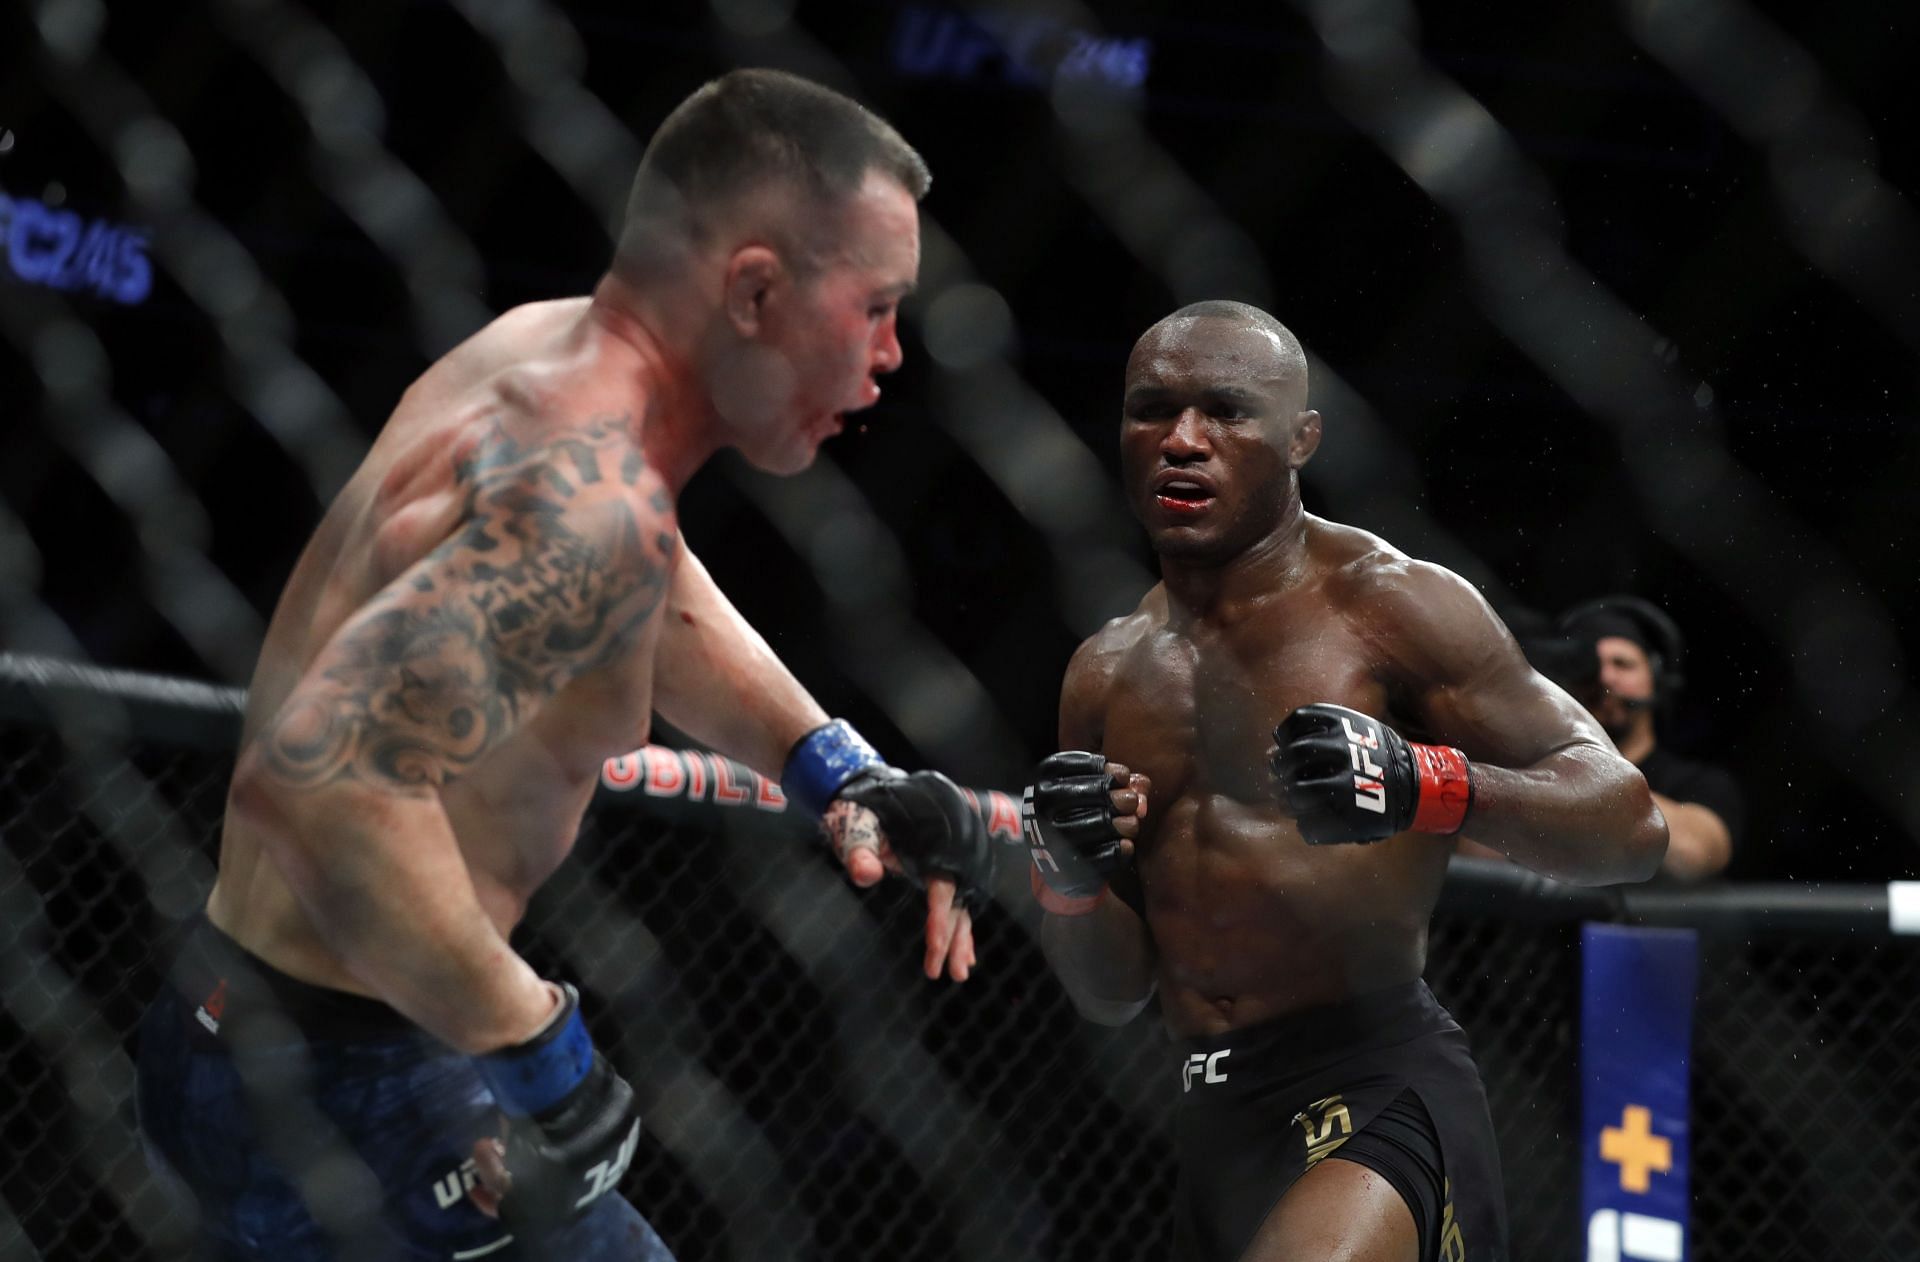 Kamaru Usman knocked Colby Covington out in their first meeting at UFC 245